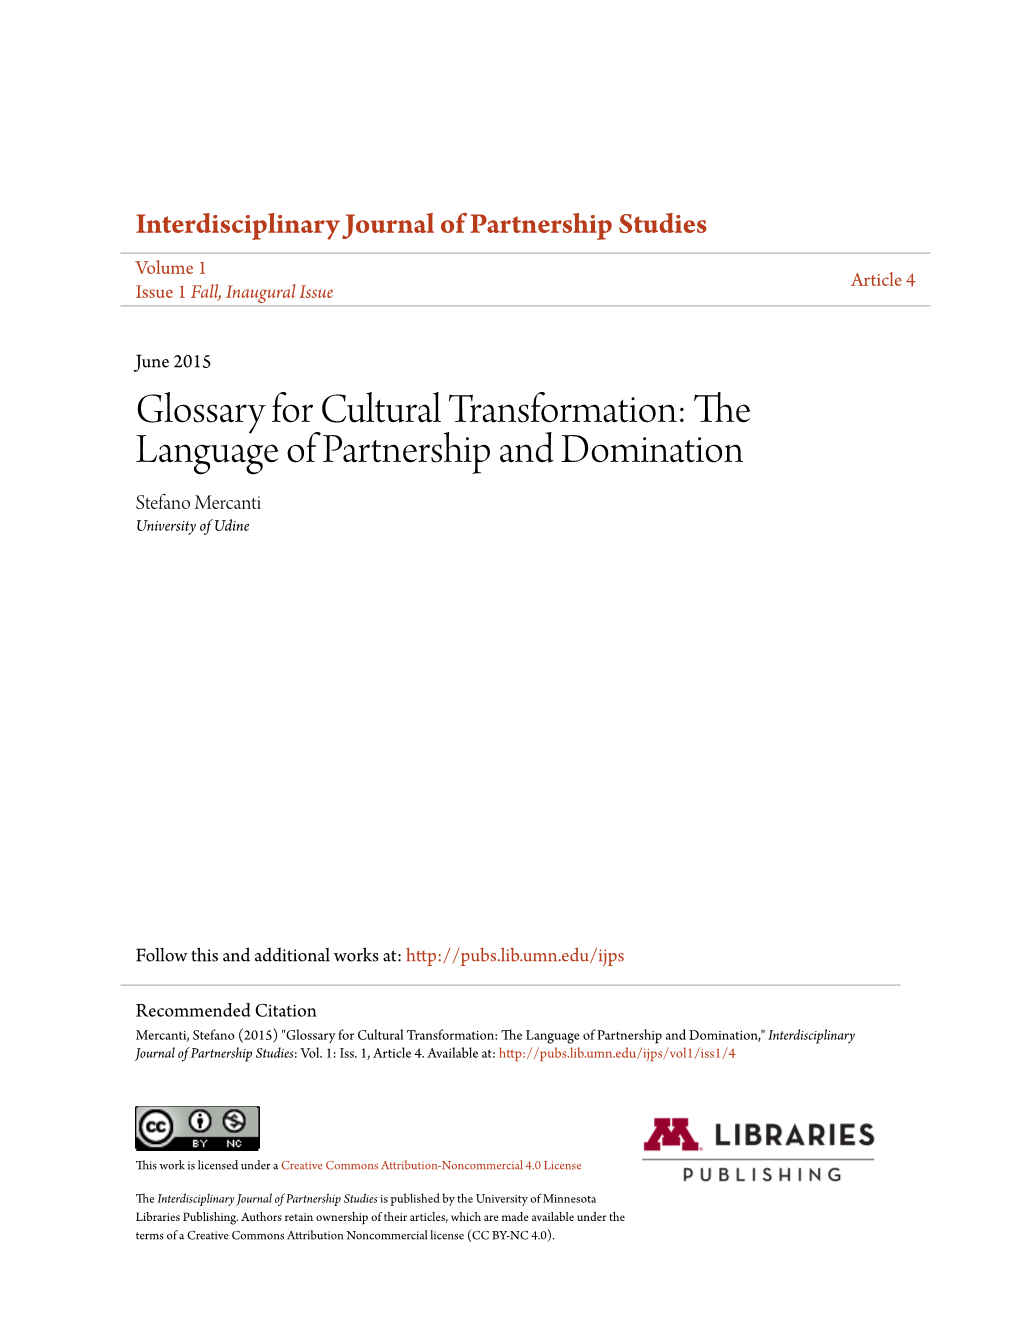 Glossary for Cultural Transformation: the Language of Partnership and Domination Stefano Mercanti University of Udine